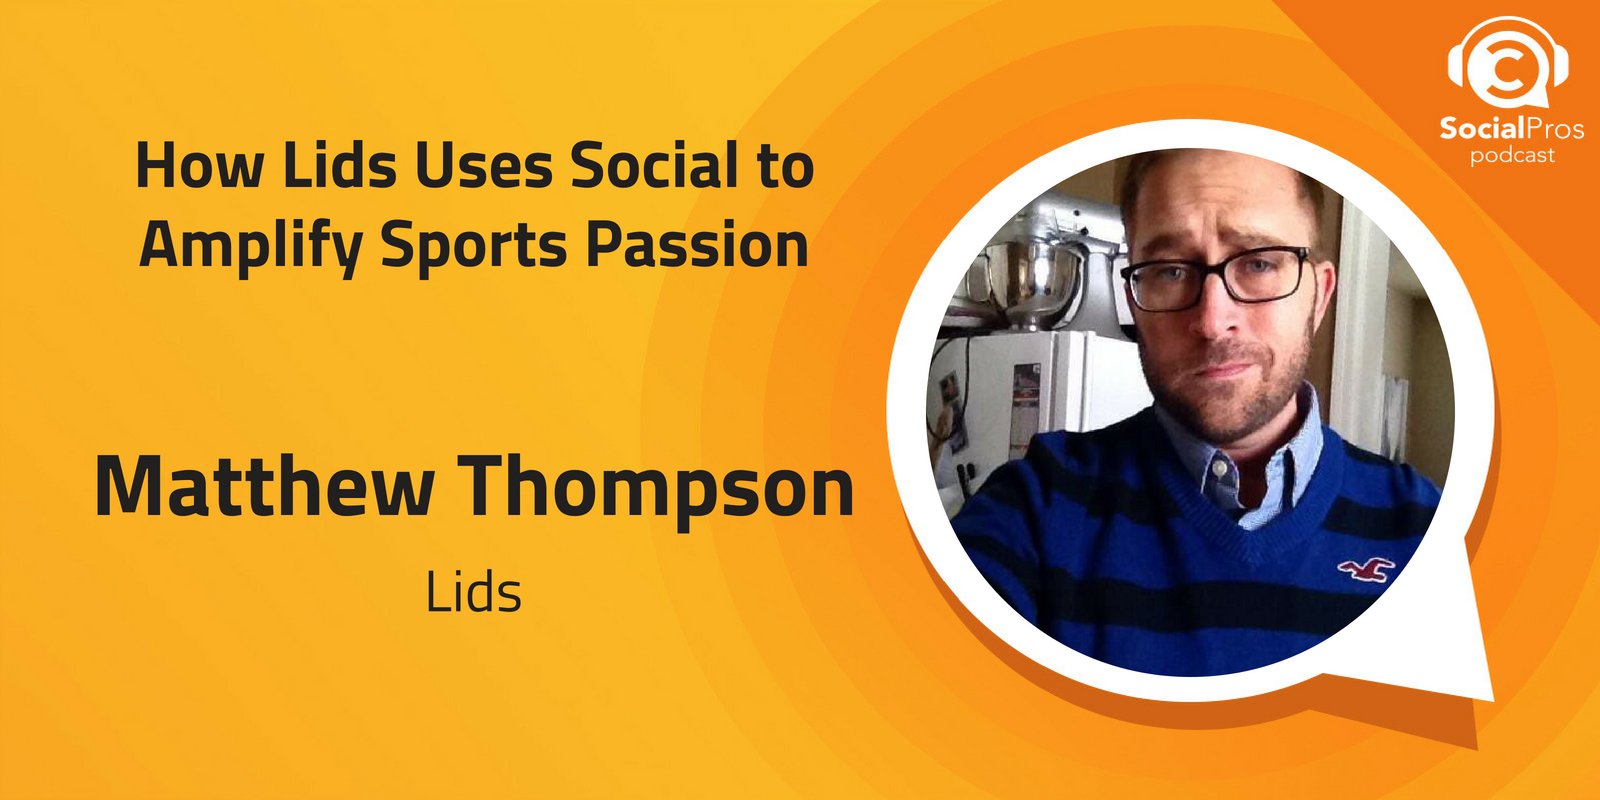 How Lids Uses Social to Amplify Sports Passion